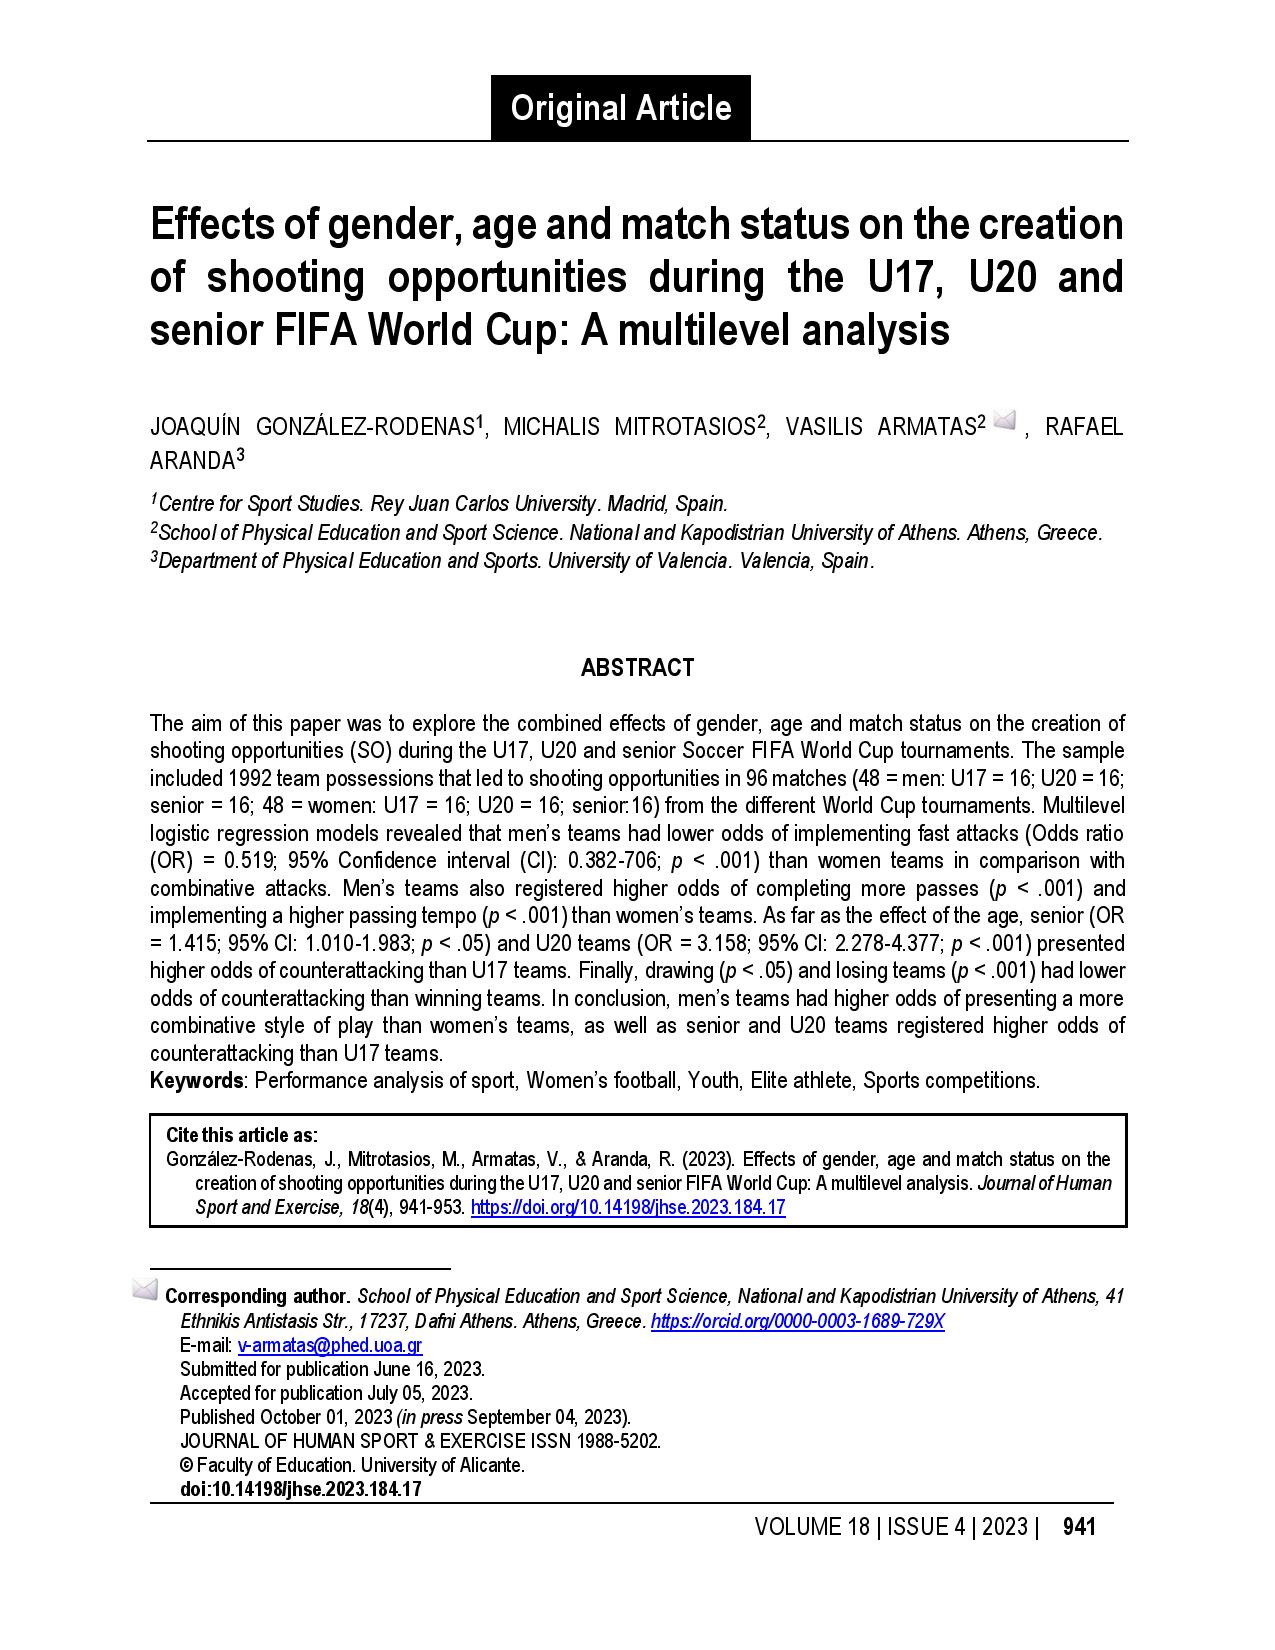 Effects of gender, age and match status on the creation of shooting opportunities during the U17, U20 and senior FIFA World Cup: A multilevel analysis